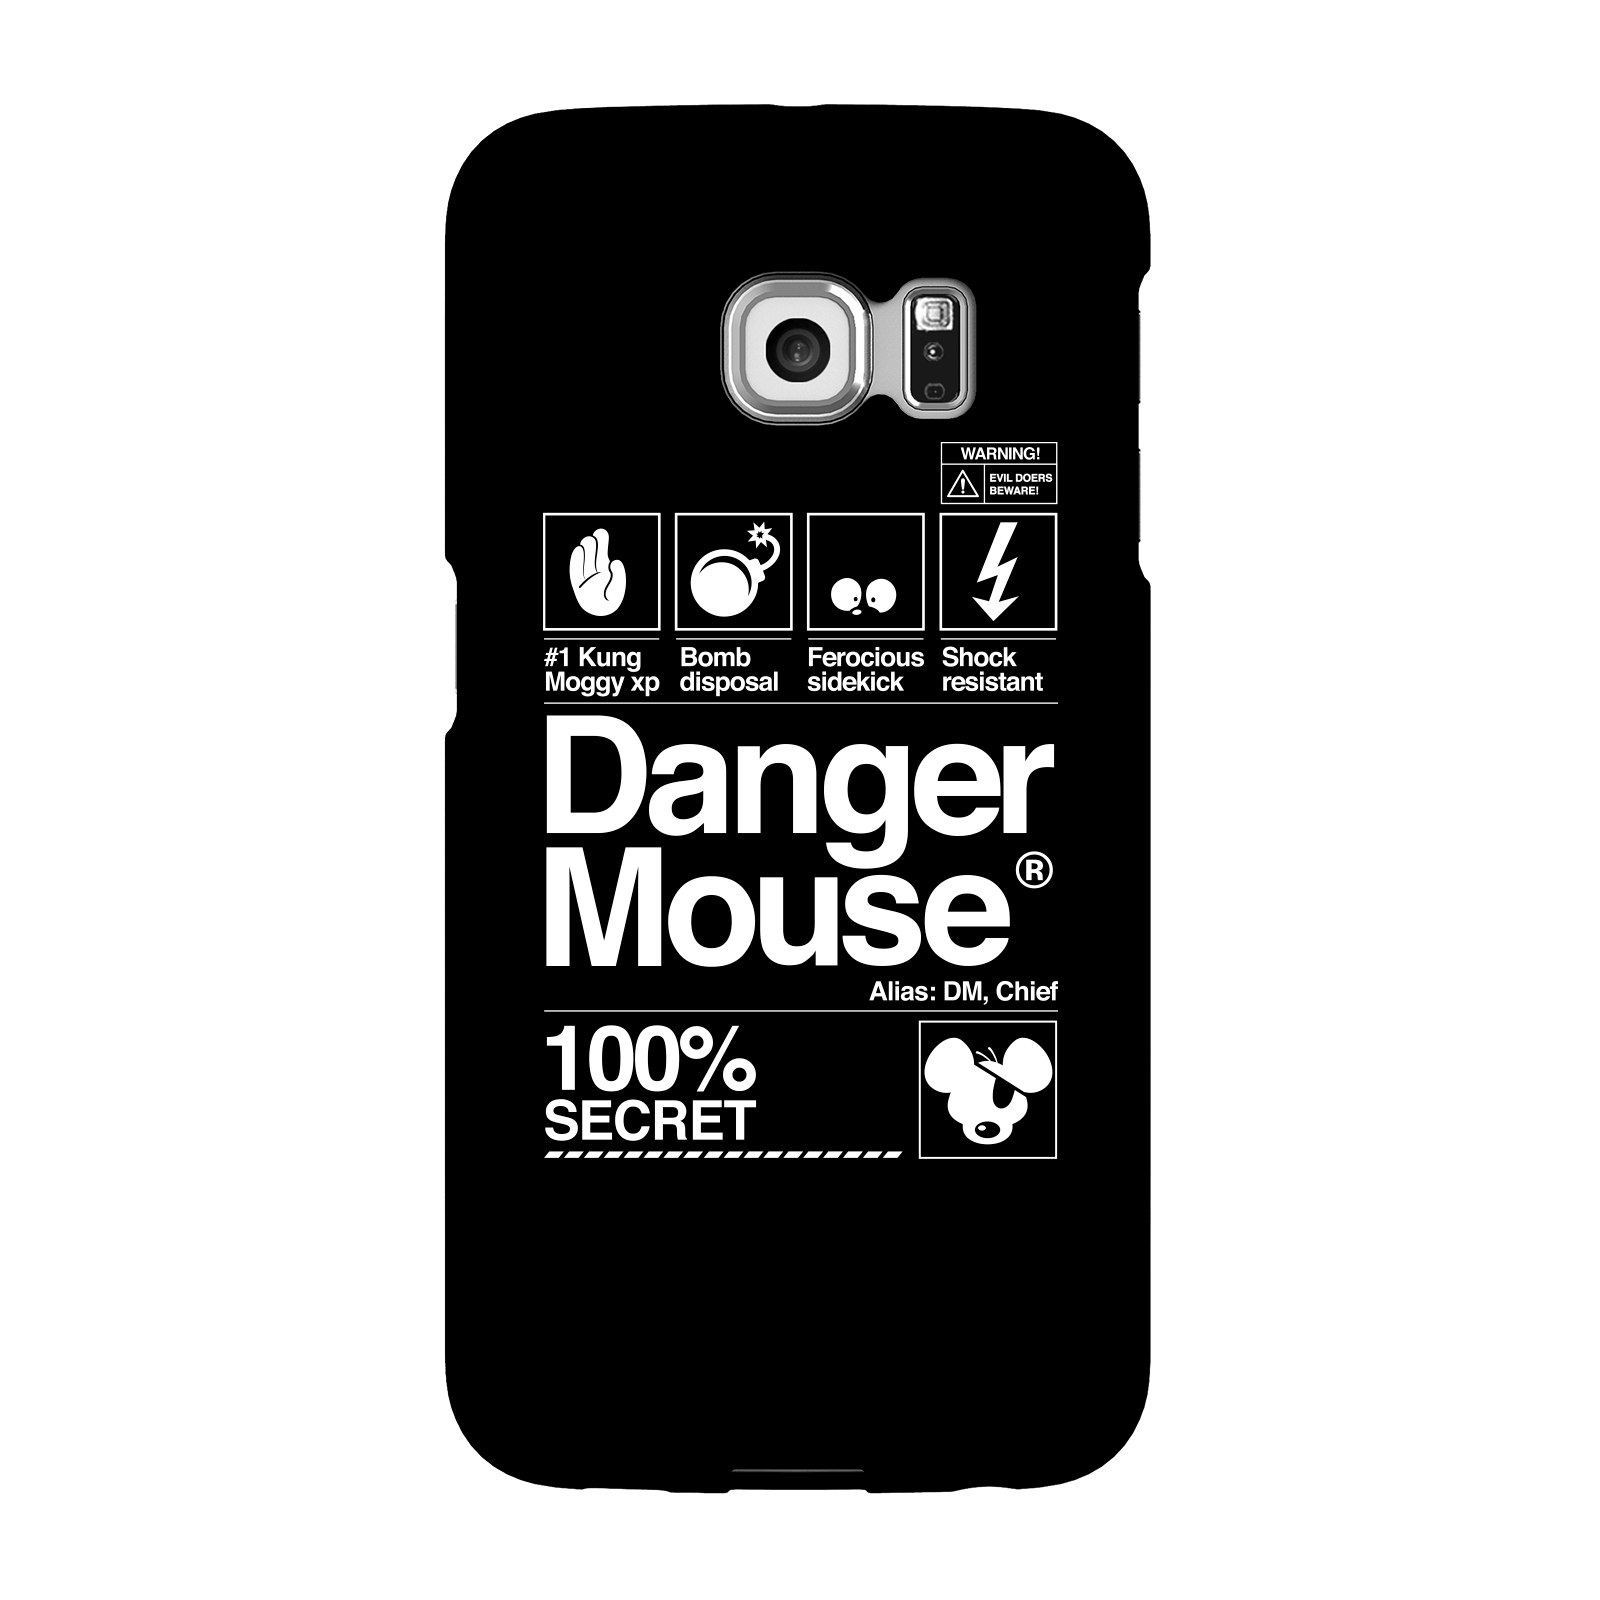 Danger Mouse 100% Secret Phone Case for iPhone and Android - Samsung S6 Edge - Snap Case - Matte